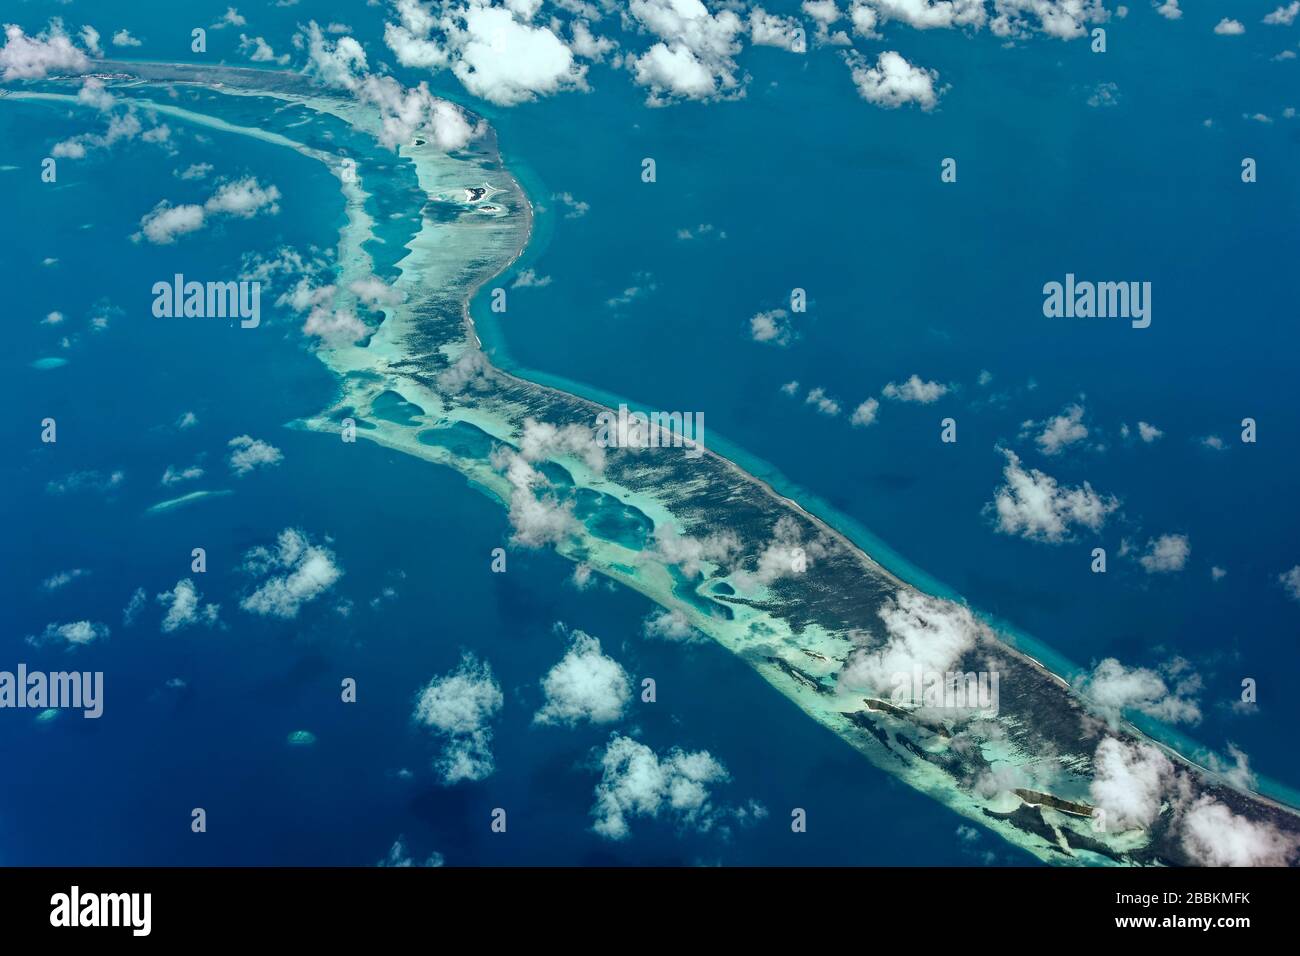 Outer reef with large dredged sand areas for land reclamation elsewhere, Meemu Atoll or Mulaktholhu Indian Ocean, Maldives Stock Photo